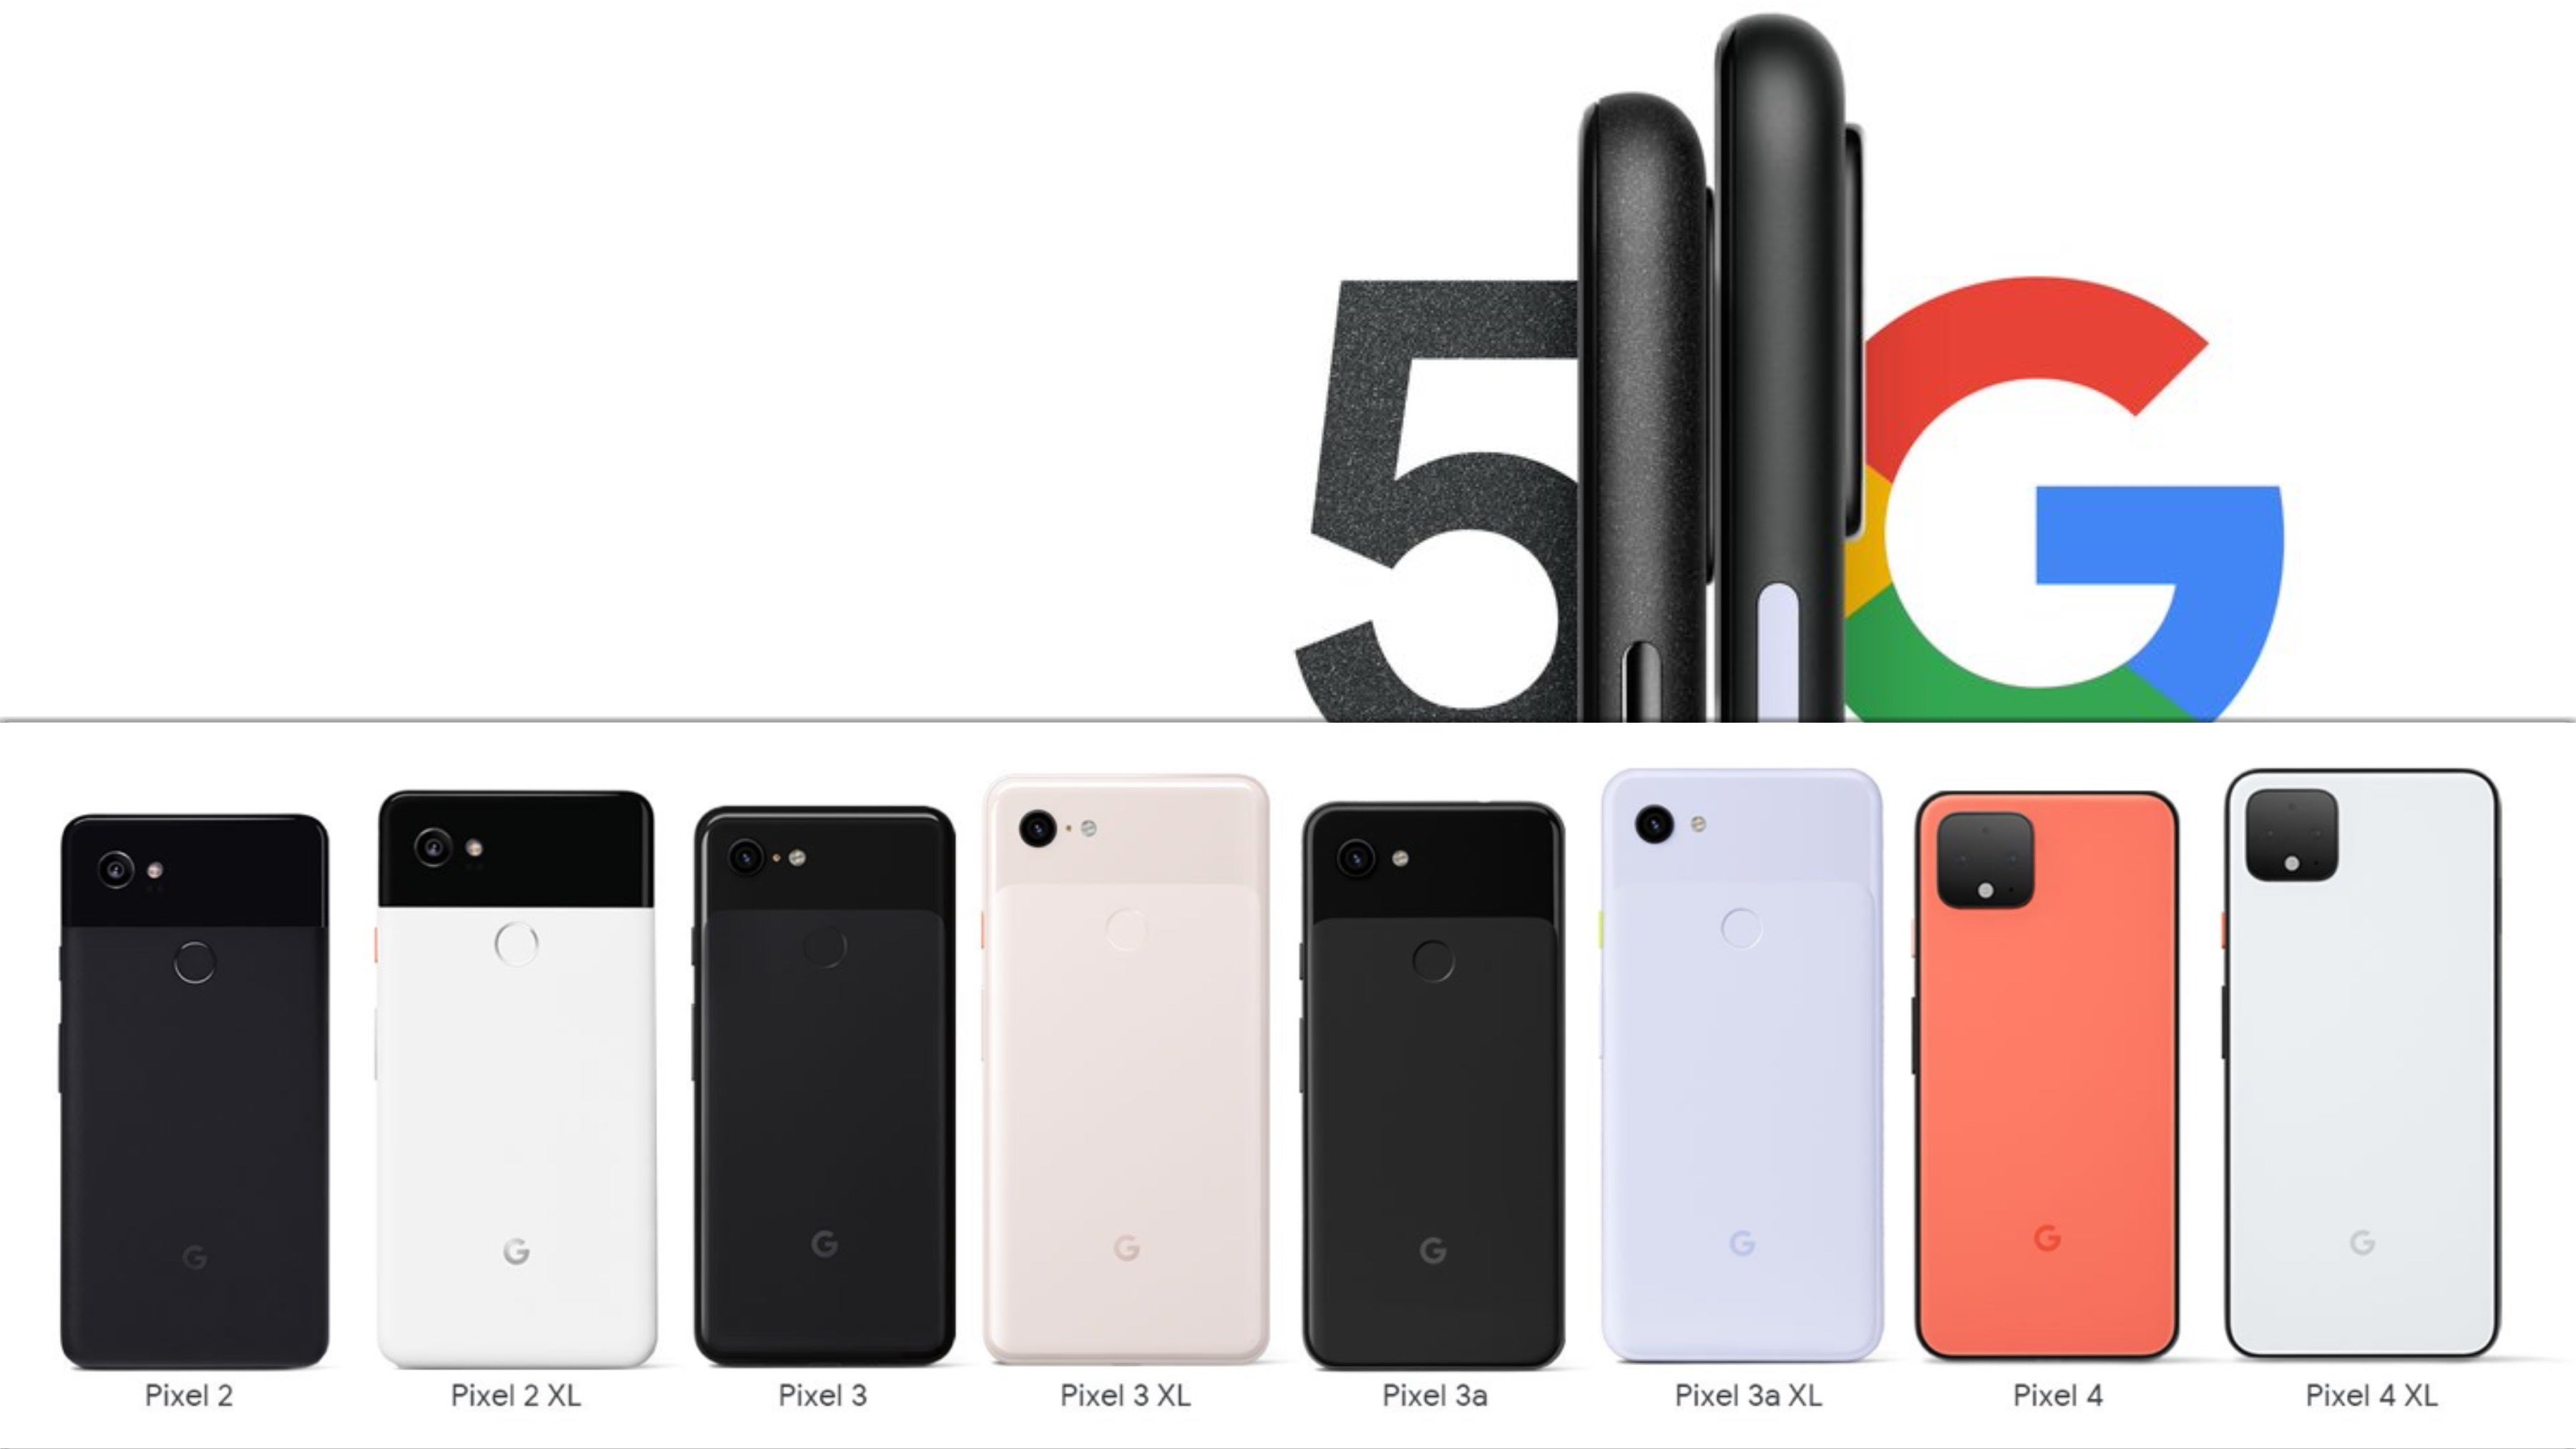 Is Google finally going to become serious about selling phones? - Google Pixel 6: iPhone 13 & Galaxy S21 killer - dead on arrival?